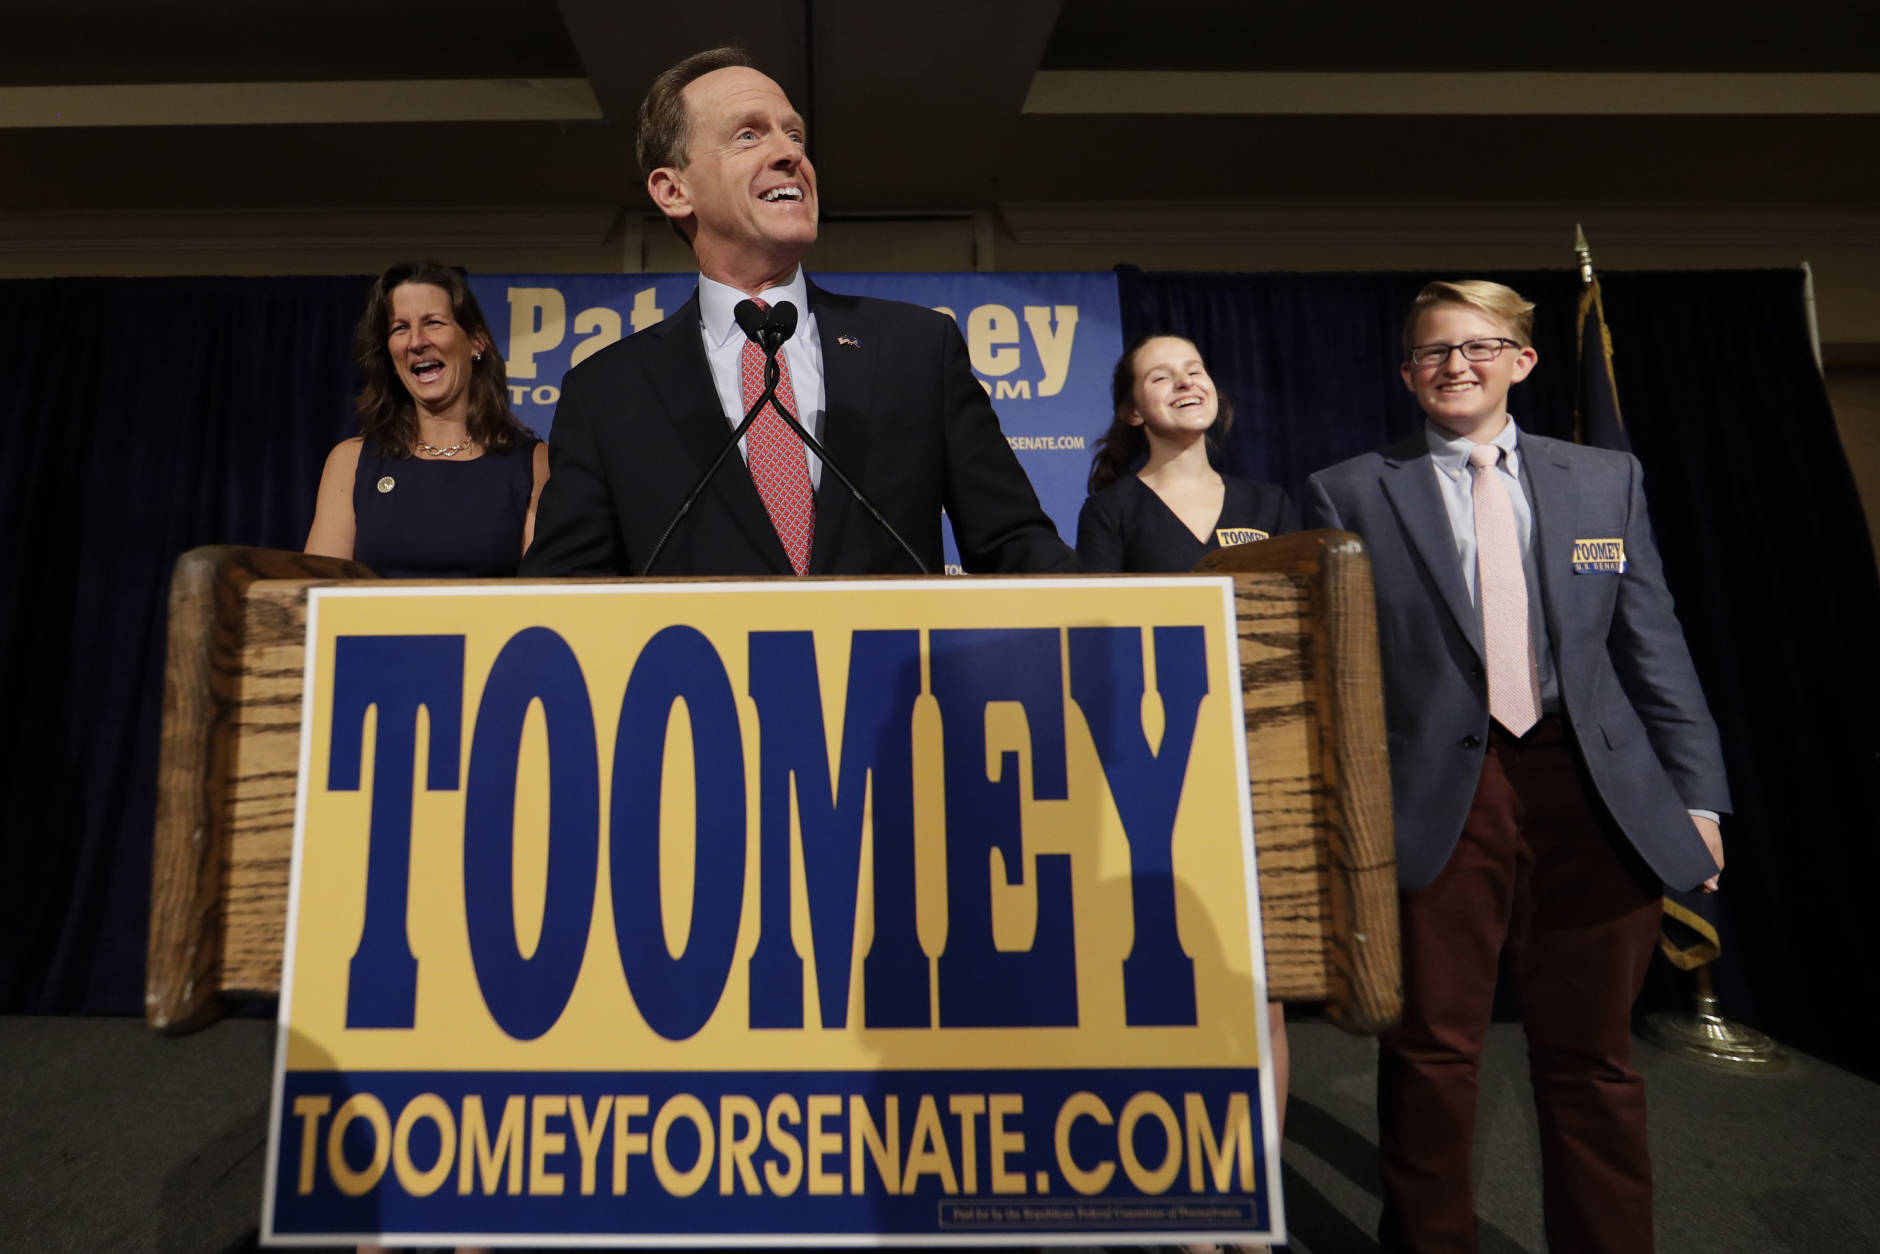 Sen. Pat Toomey, R-Pa., smiles as he speaks to supporters during an election night event, early Wednesday morning, Nov. 9, 2016, in Breinigsville, Pa. (AP Photo/Matt Slocum)